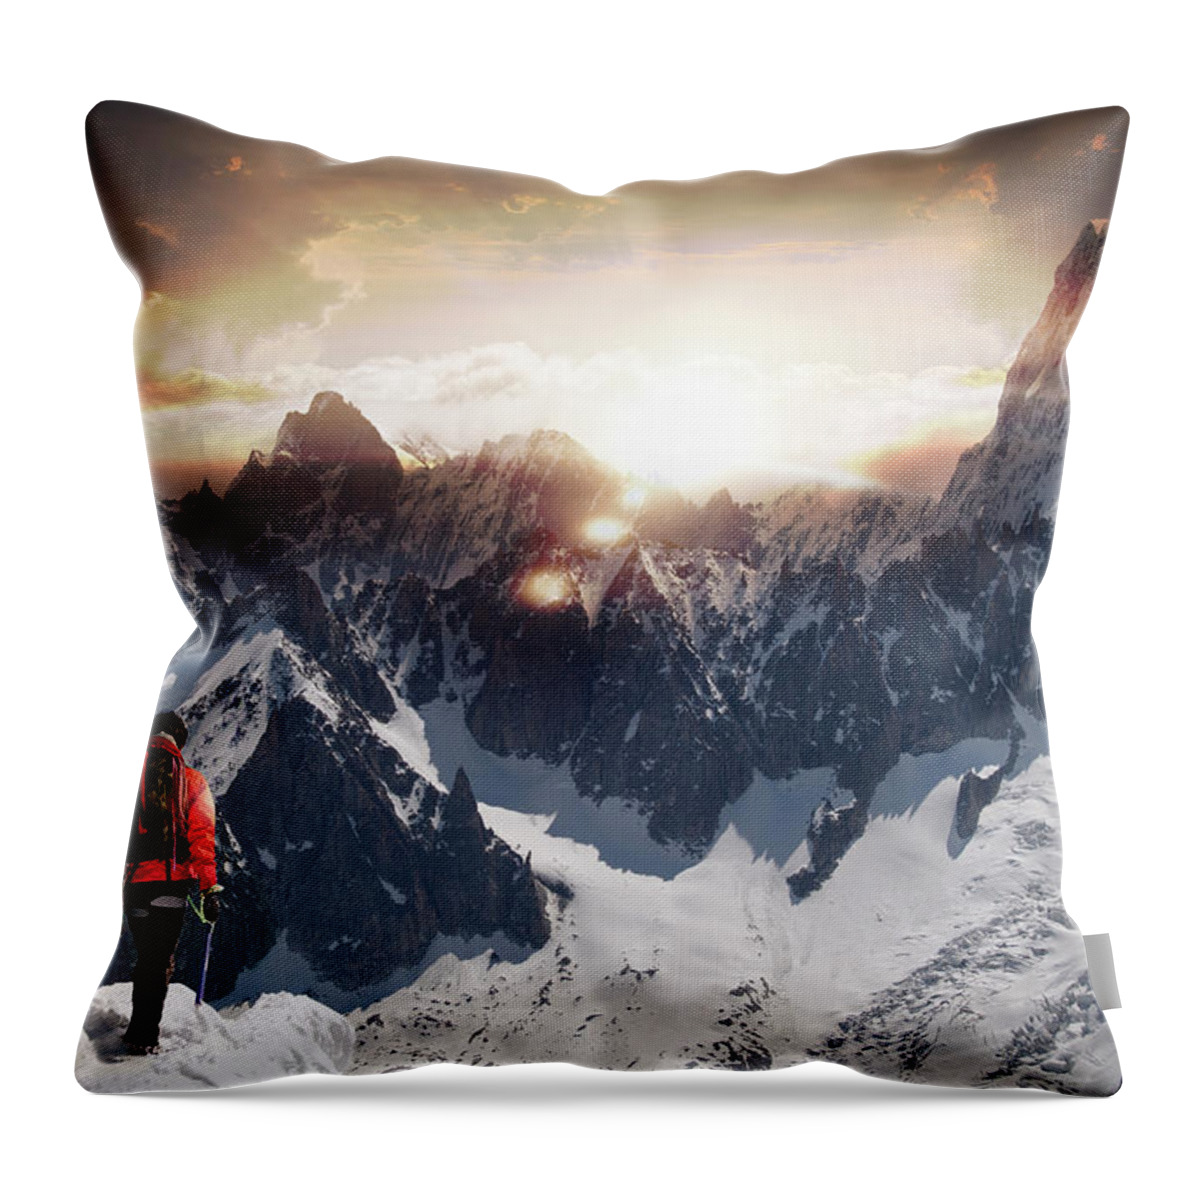 Scenics Throw Pillow featuring the photograph Lone Climber Watching A Mountain Sunset by Buena Vista Images